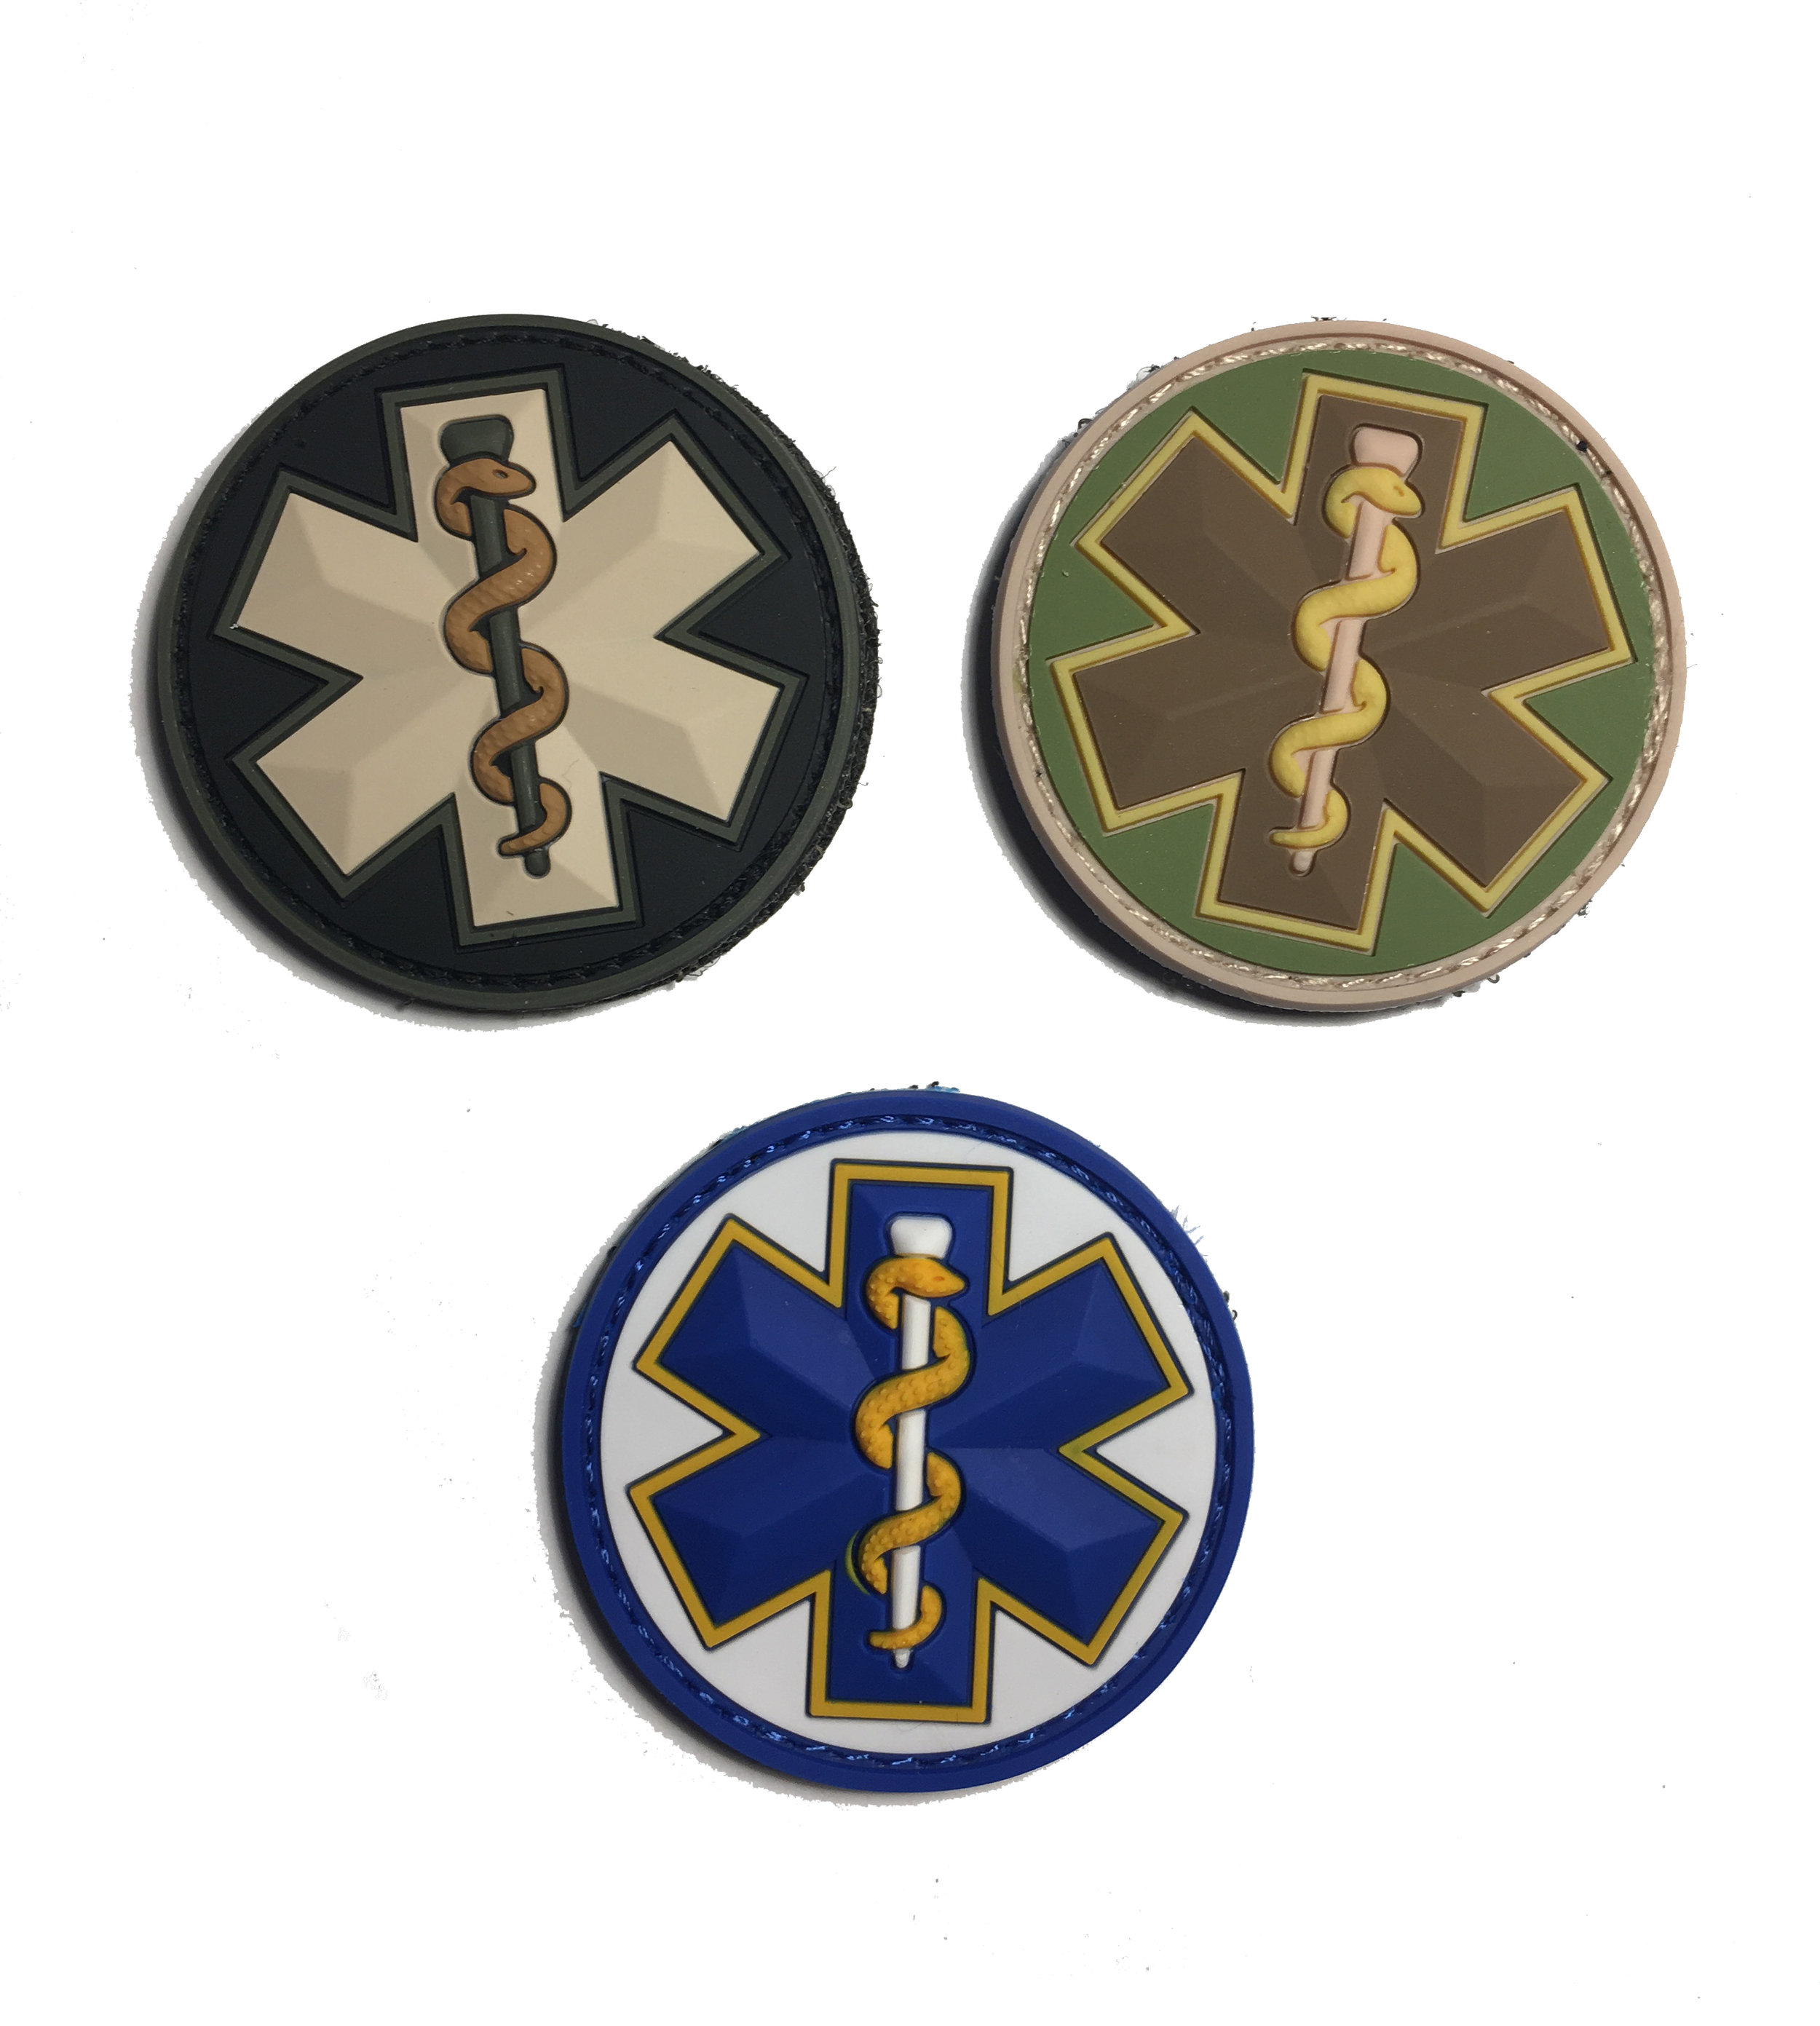 2AFTER1 EMS EMT Star of Life Paramedic Medical Morale Tactical Army Gear Hook&Loop Patch 